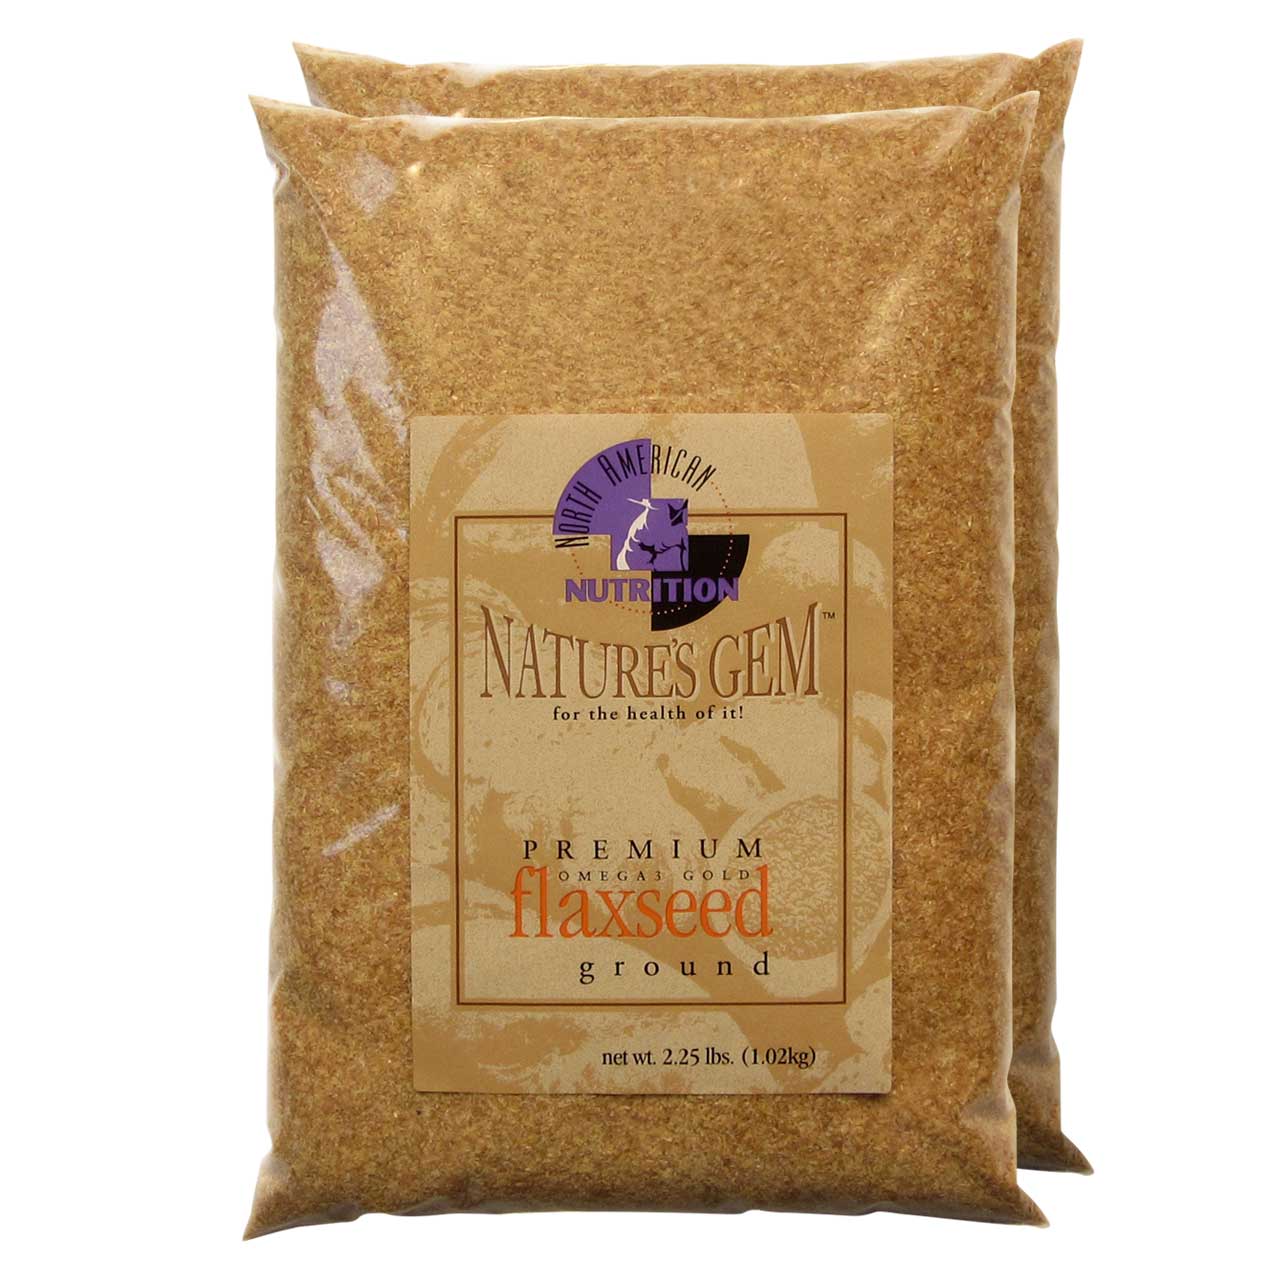 Premium Whole Golden Flaxseed 2.25LB Bag from Goldenflax.com